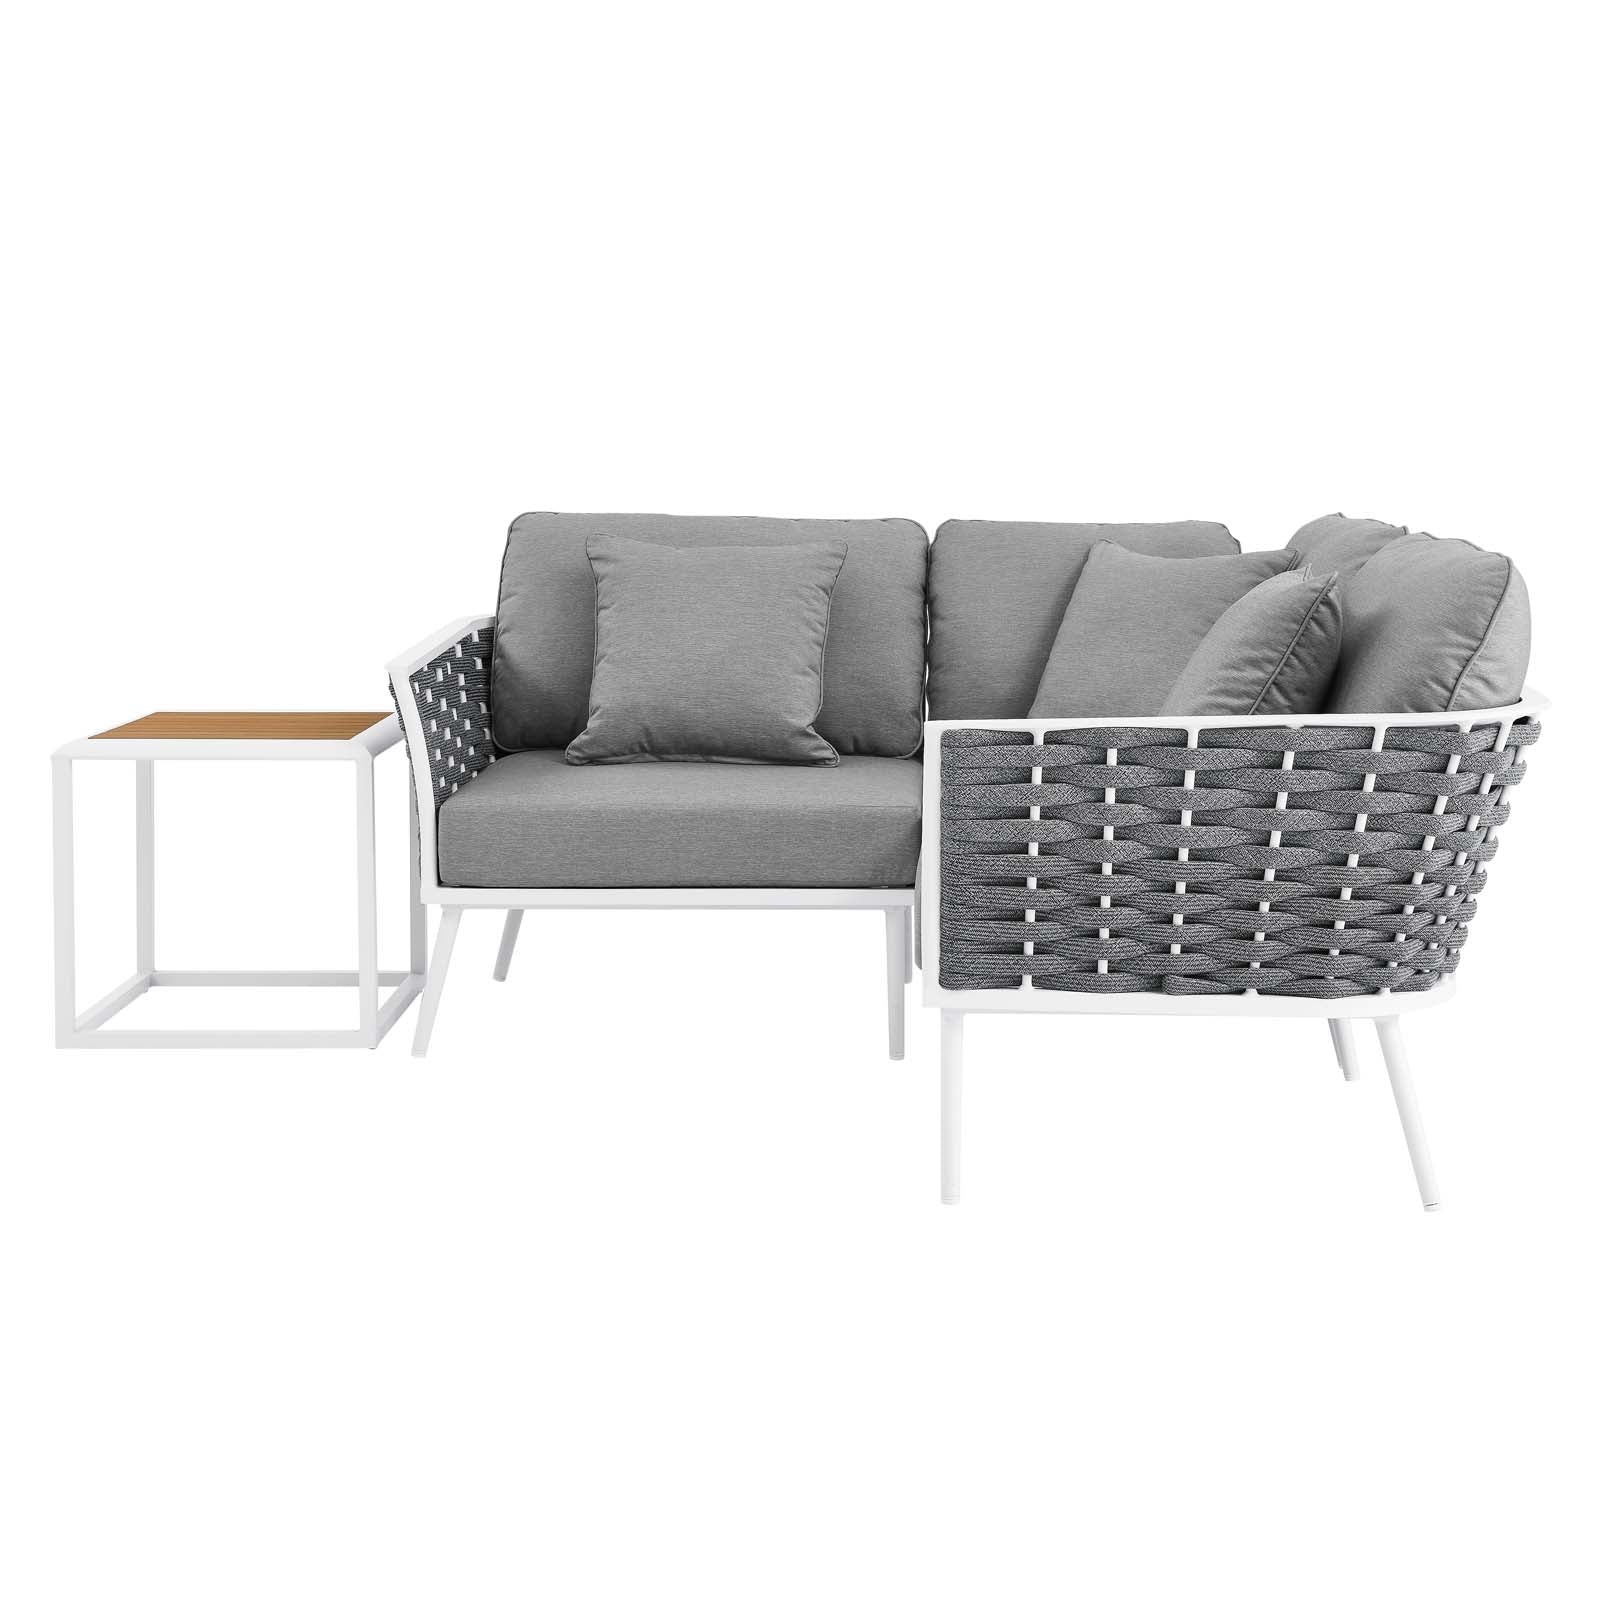 Stance 4 Piece Outdoor Patio Aluminum Sectional Sofa Set-Outdoor Set-Modway-Wall2Wall Furnishings